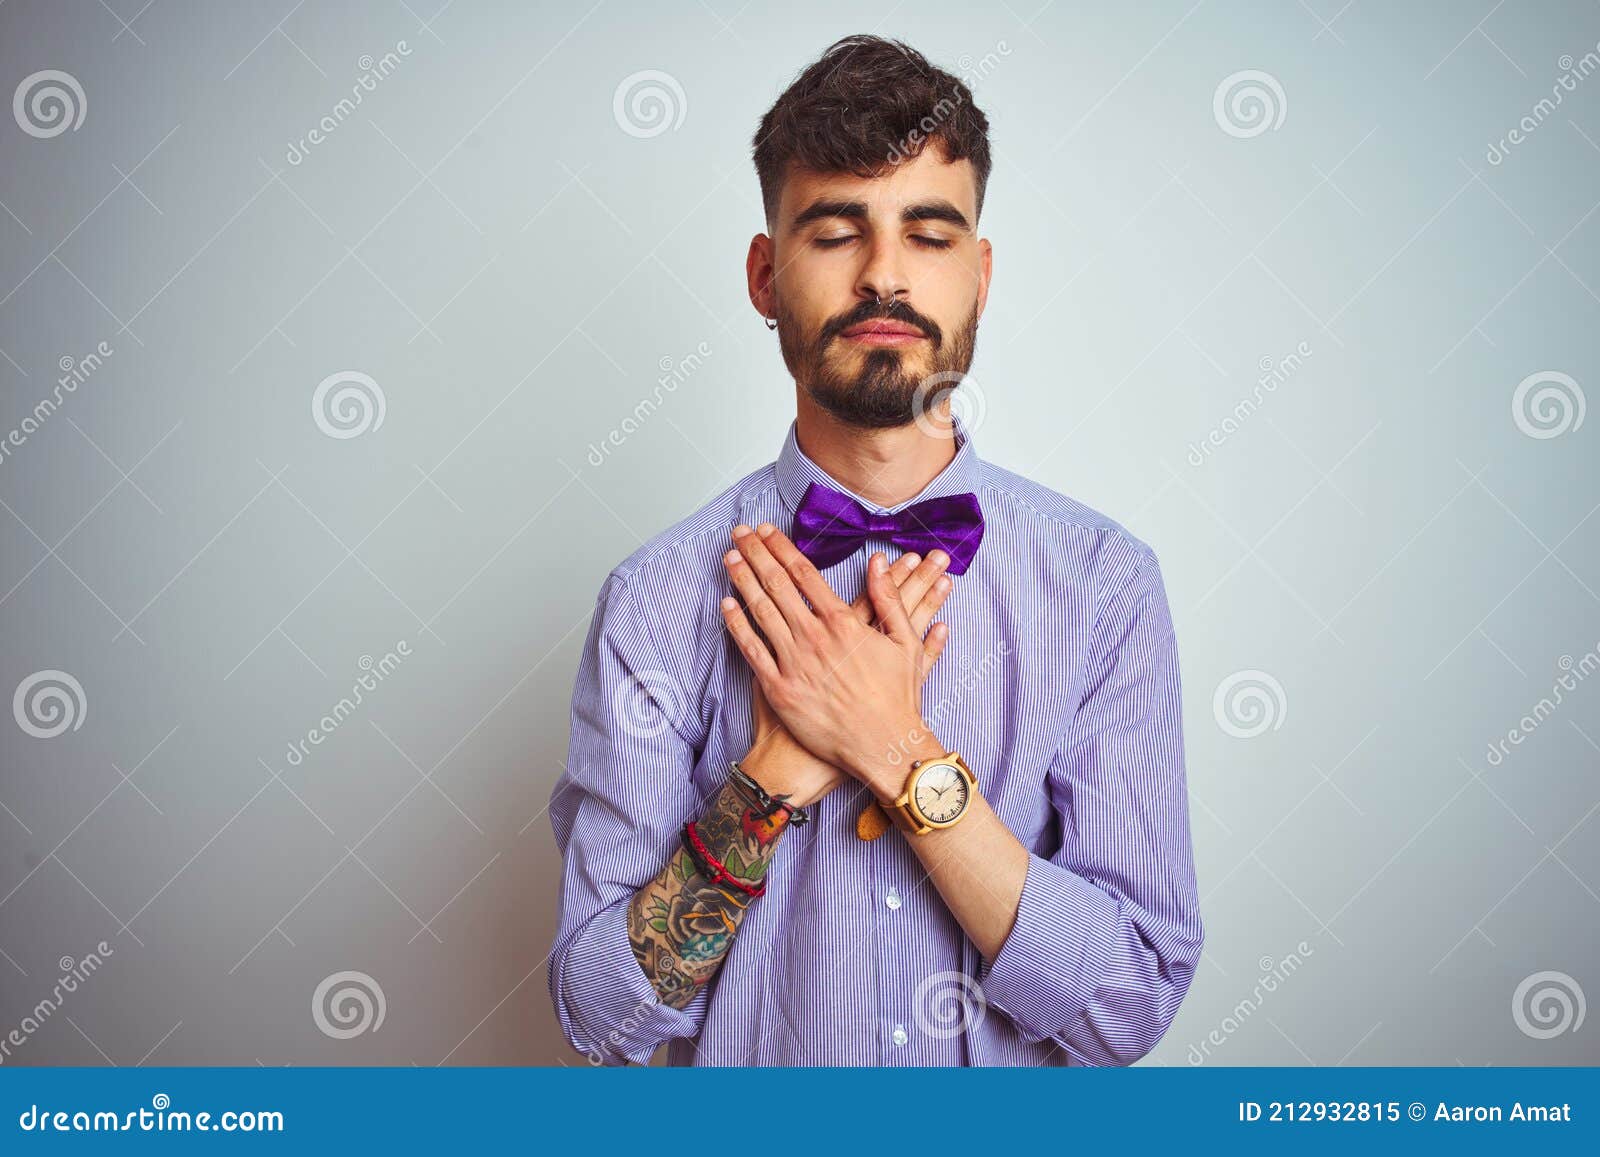 Young Man with Tattoo Wearing Purple Shirt and Bow Tie Over Isolated White Background Smiling with Hands on Chest with Closed Eyes Stock Image - Image of isolated, casual: 212932815